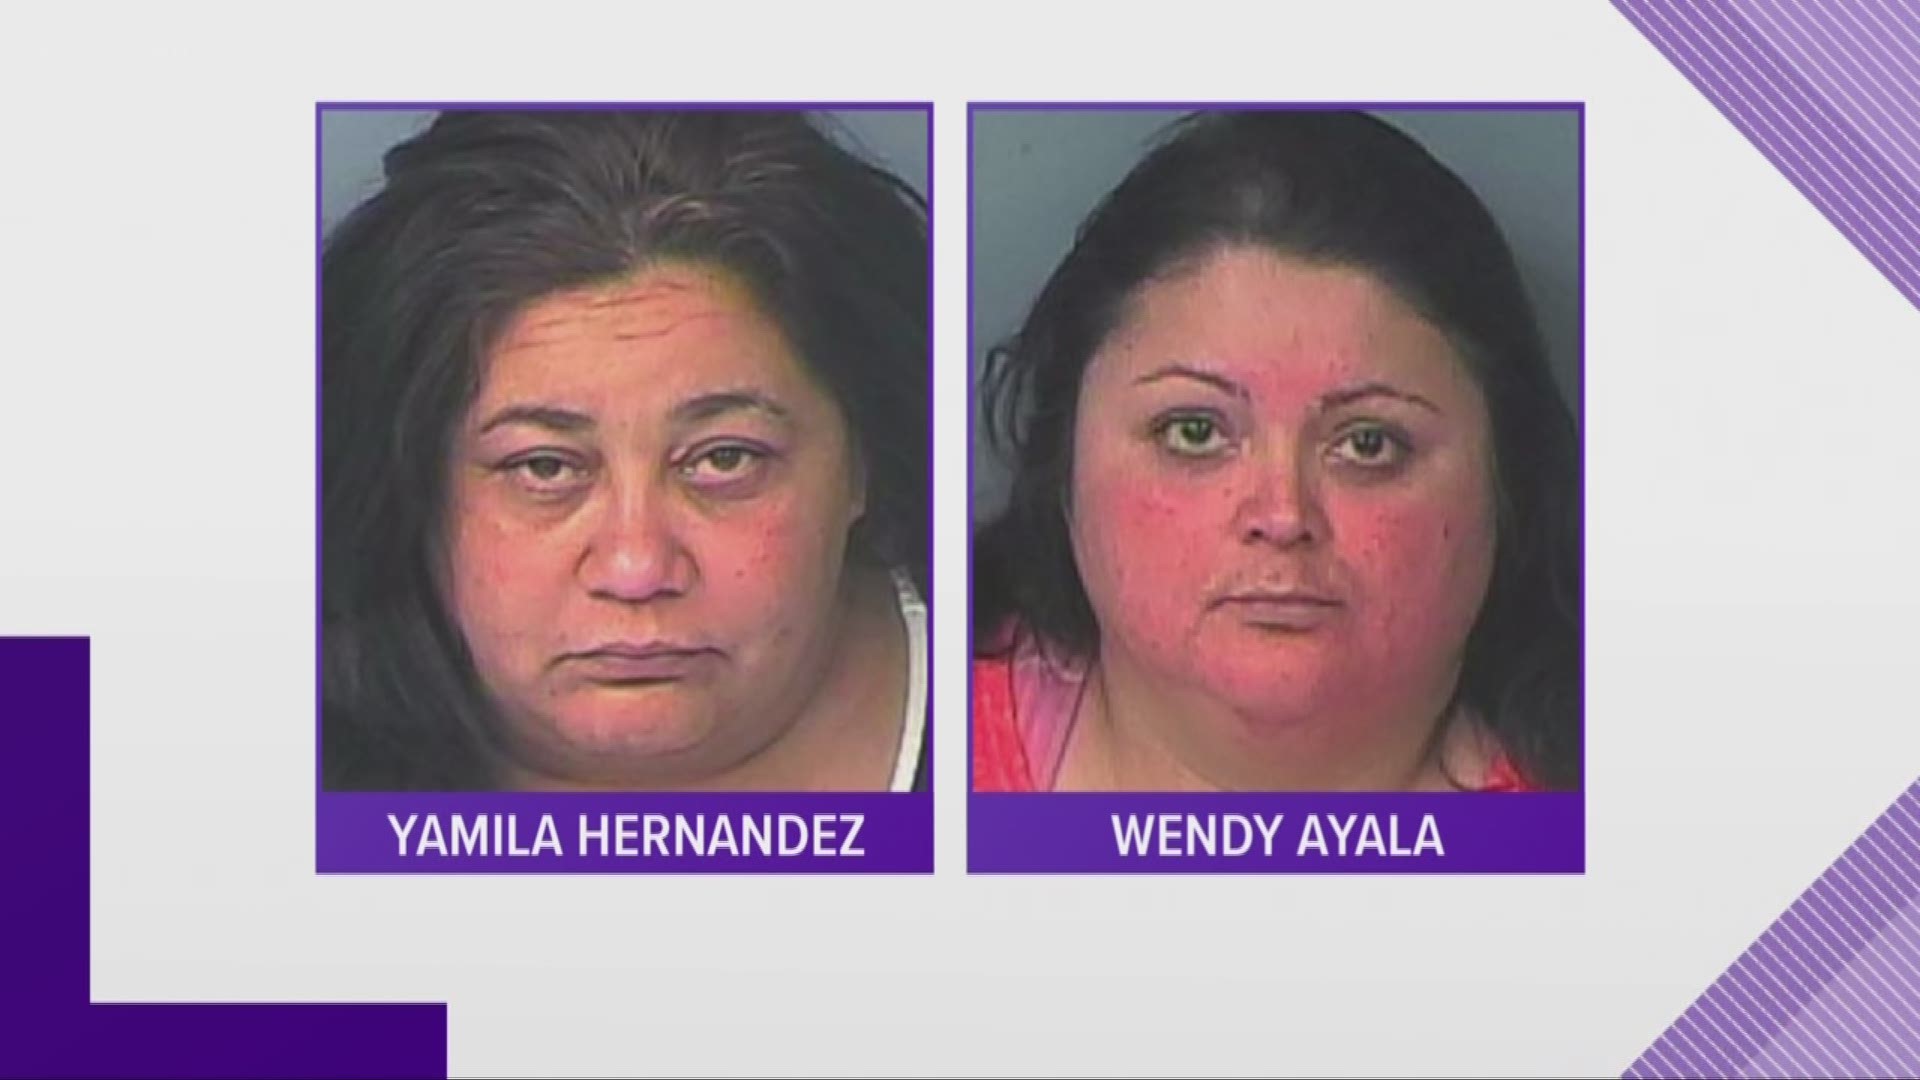 Yamila Quintana Hernandez, her daughter and another woman are accused of stealing 31 items totaling $249.58 on Monday from the Walmart at 1485 Commercial Way in Spring Hill, according to arrest records.